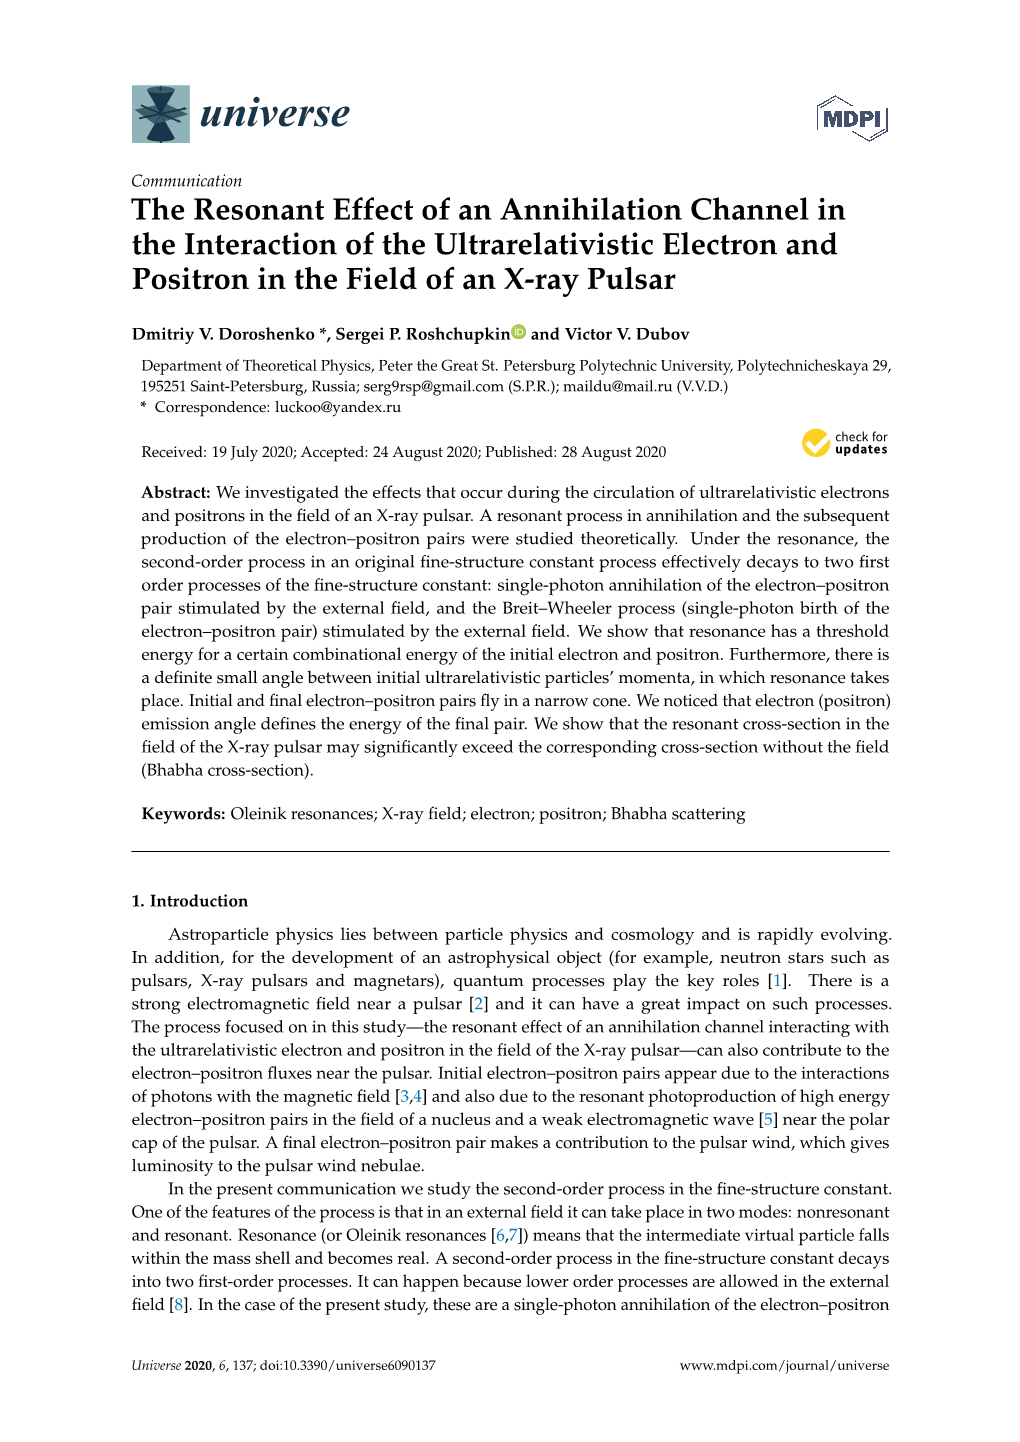 The Resonant Effect of an Annihilation Channel in the Interaction of the Ultrarelativistic Electron and Positron in the Field of an X-Ray Pulsar